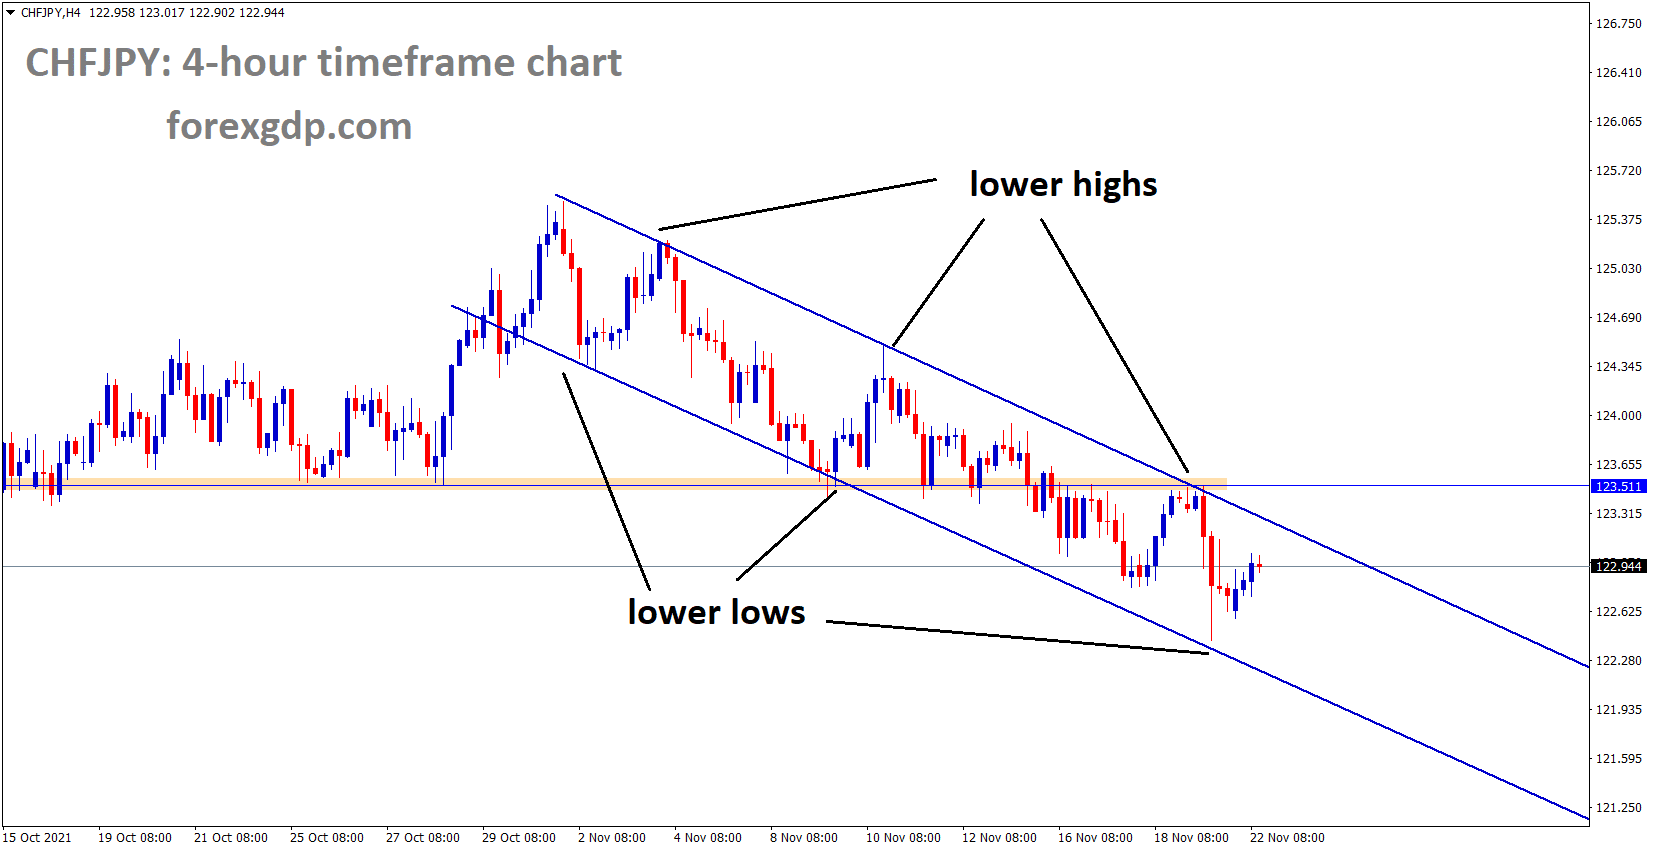 CHFJPY is moving in the Descending channel and the market moving in corrections from the bottom of the channel